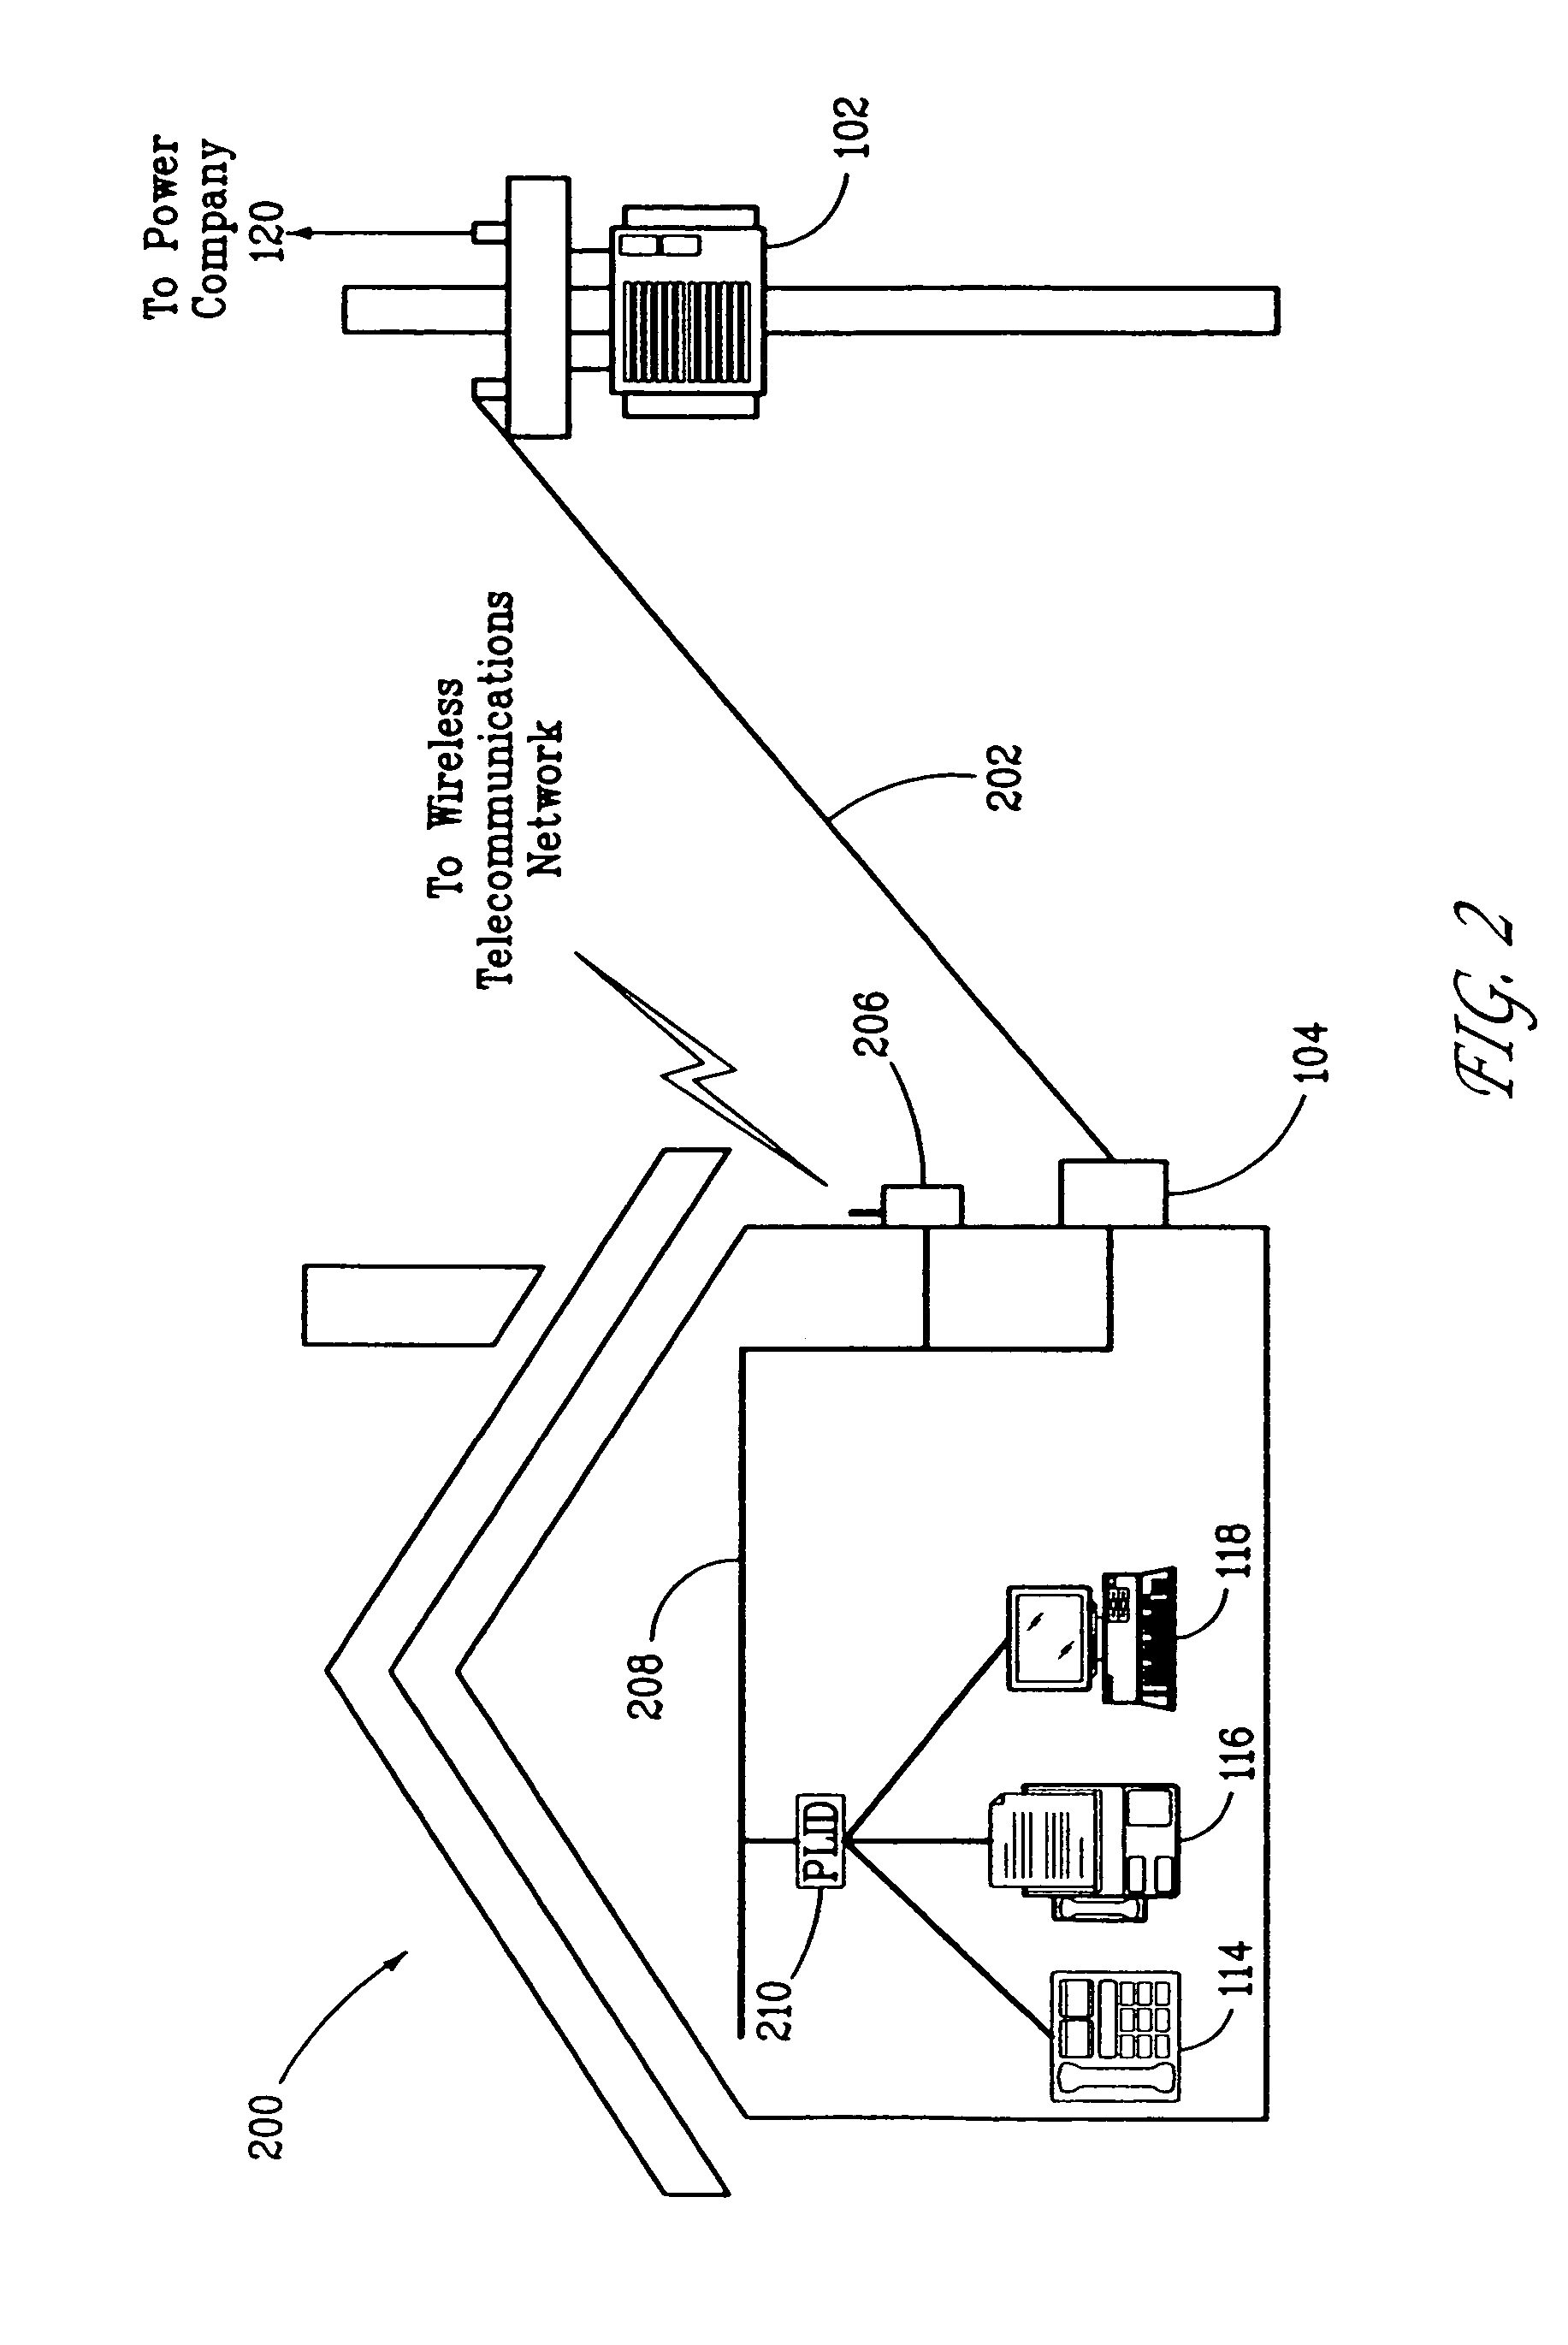 Power line coupling device and method of using the same